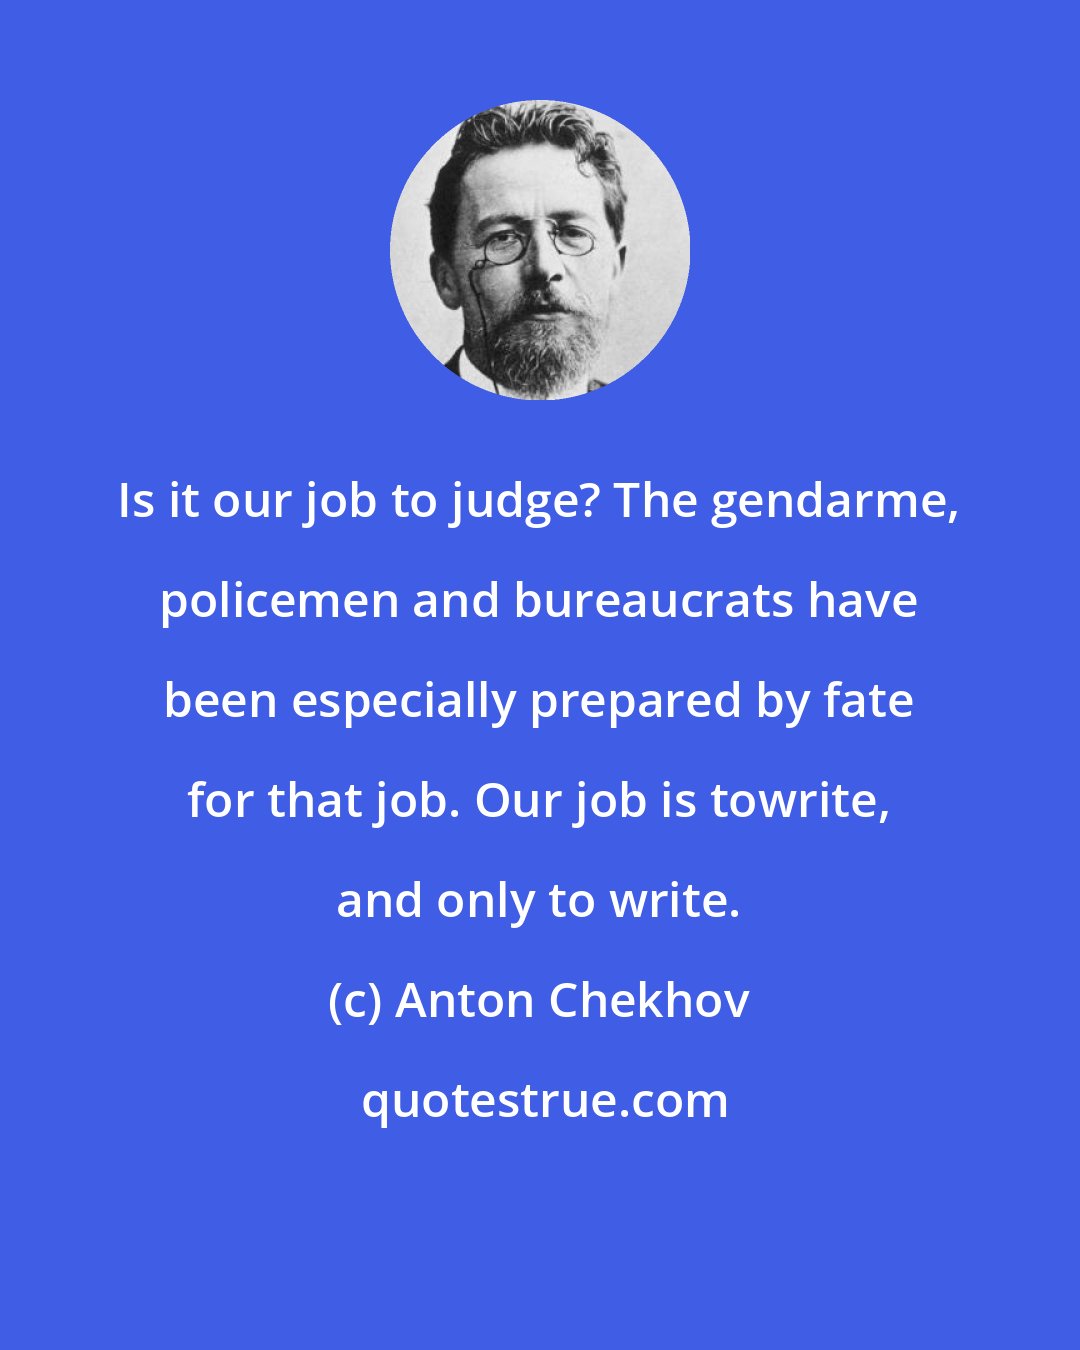 Anton Chekhov: Is it our job to judge? The gendarme, policemen and bureaucrats have been especially prepared by fate for that job. Our job is towrite, and only to write.